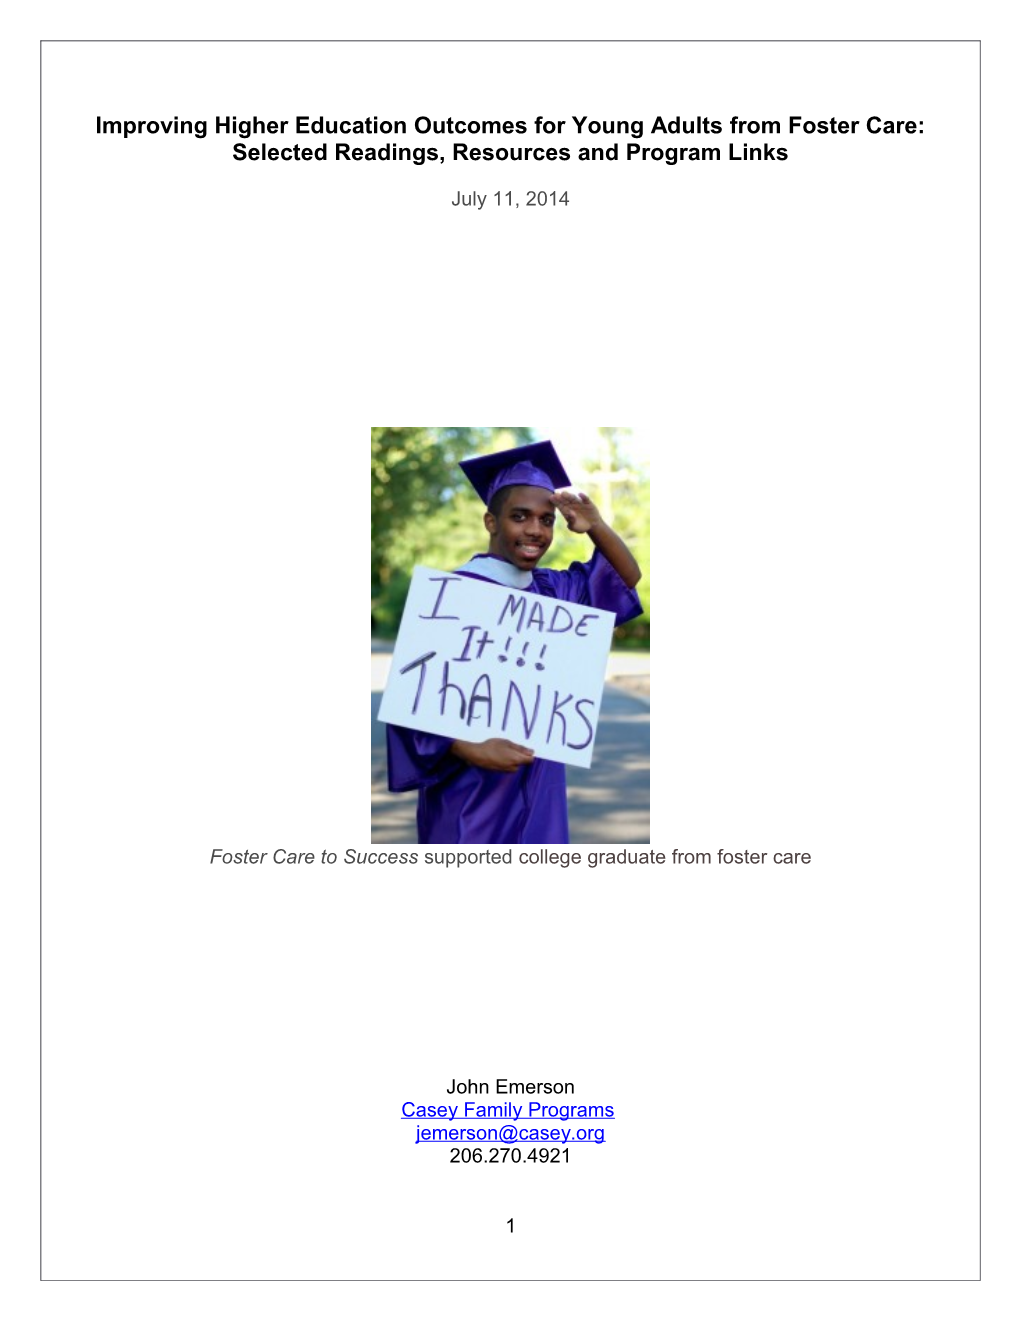 Recommended Reading Improving Higher Education Outcomes for Young Adults from Foster Care